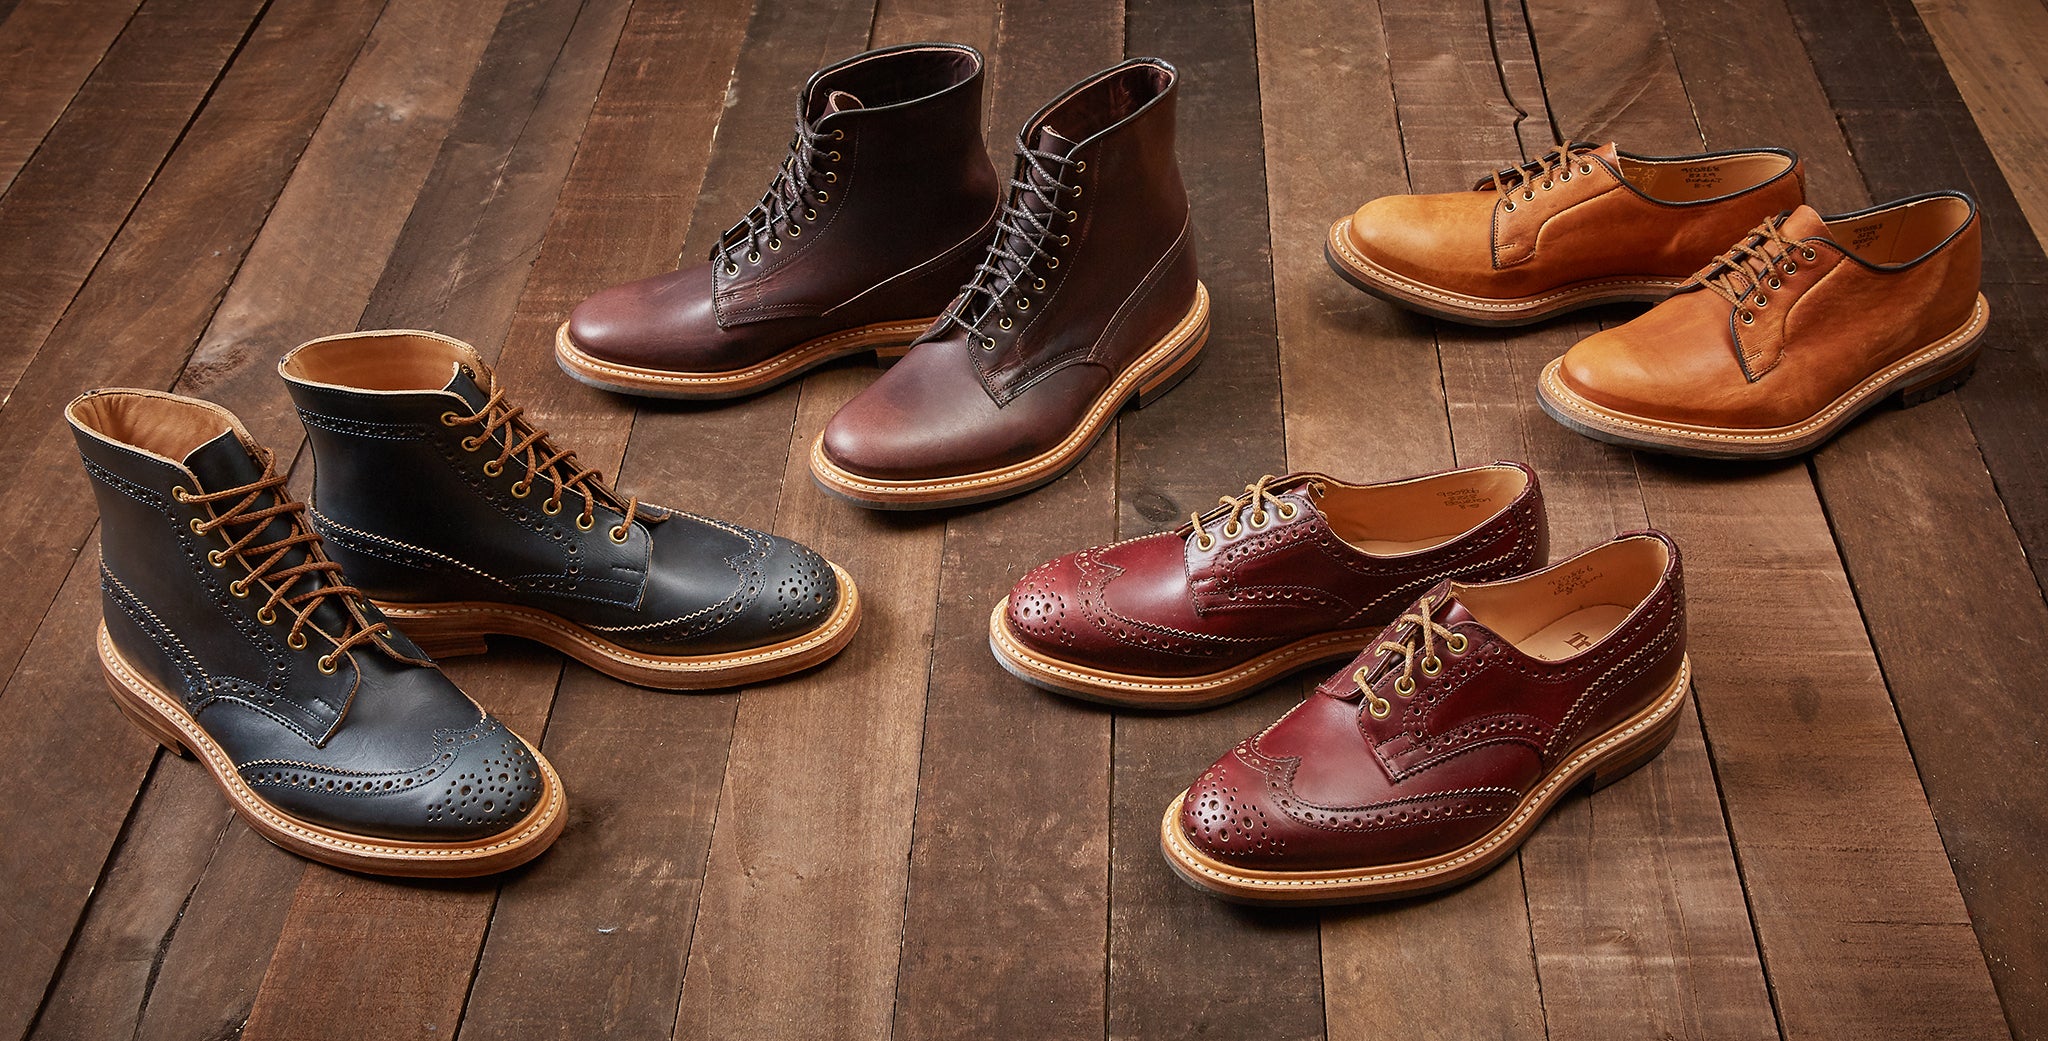 Harvest of Heritage in Harris and Horween